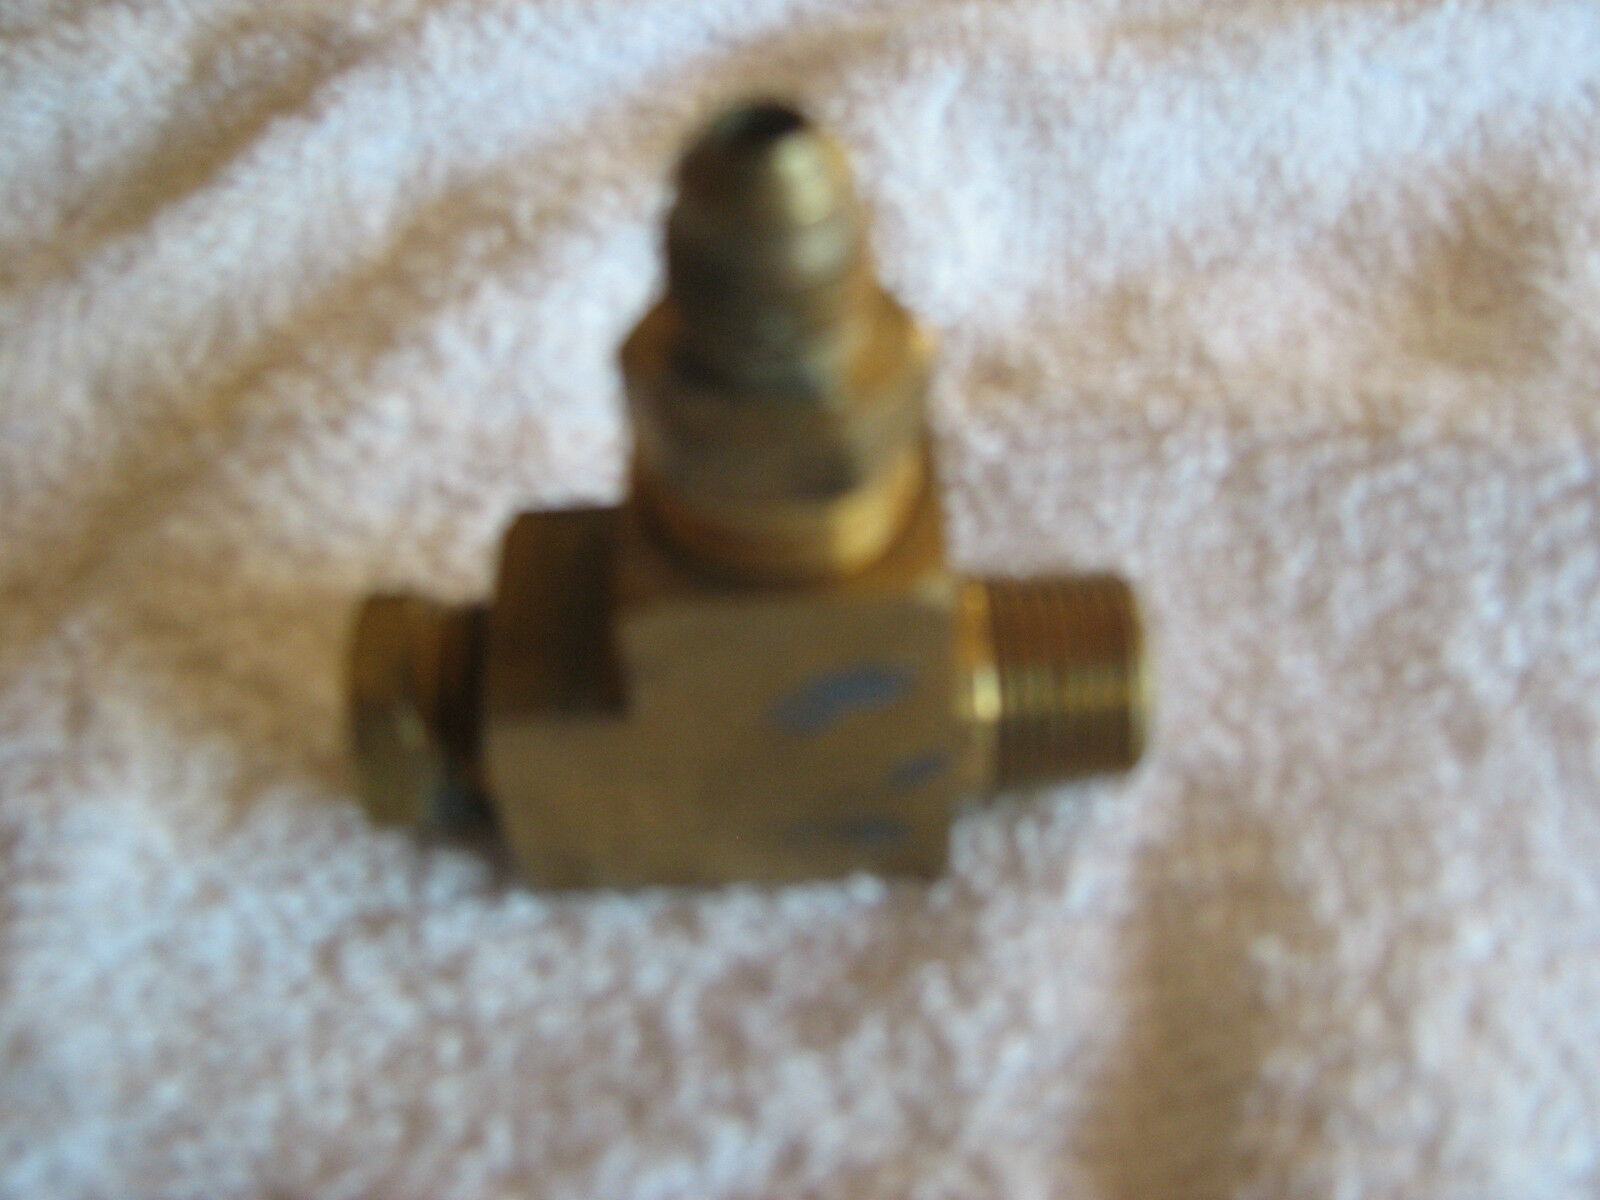 MILITARY  DODGE  M37  M43  FUEL  PUMP  TEE  INLET   NEW   N O S 